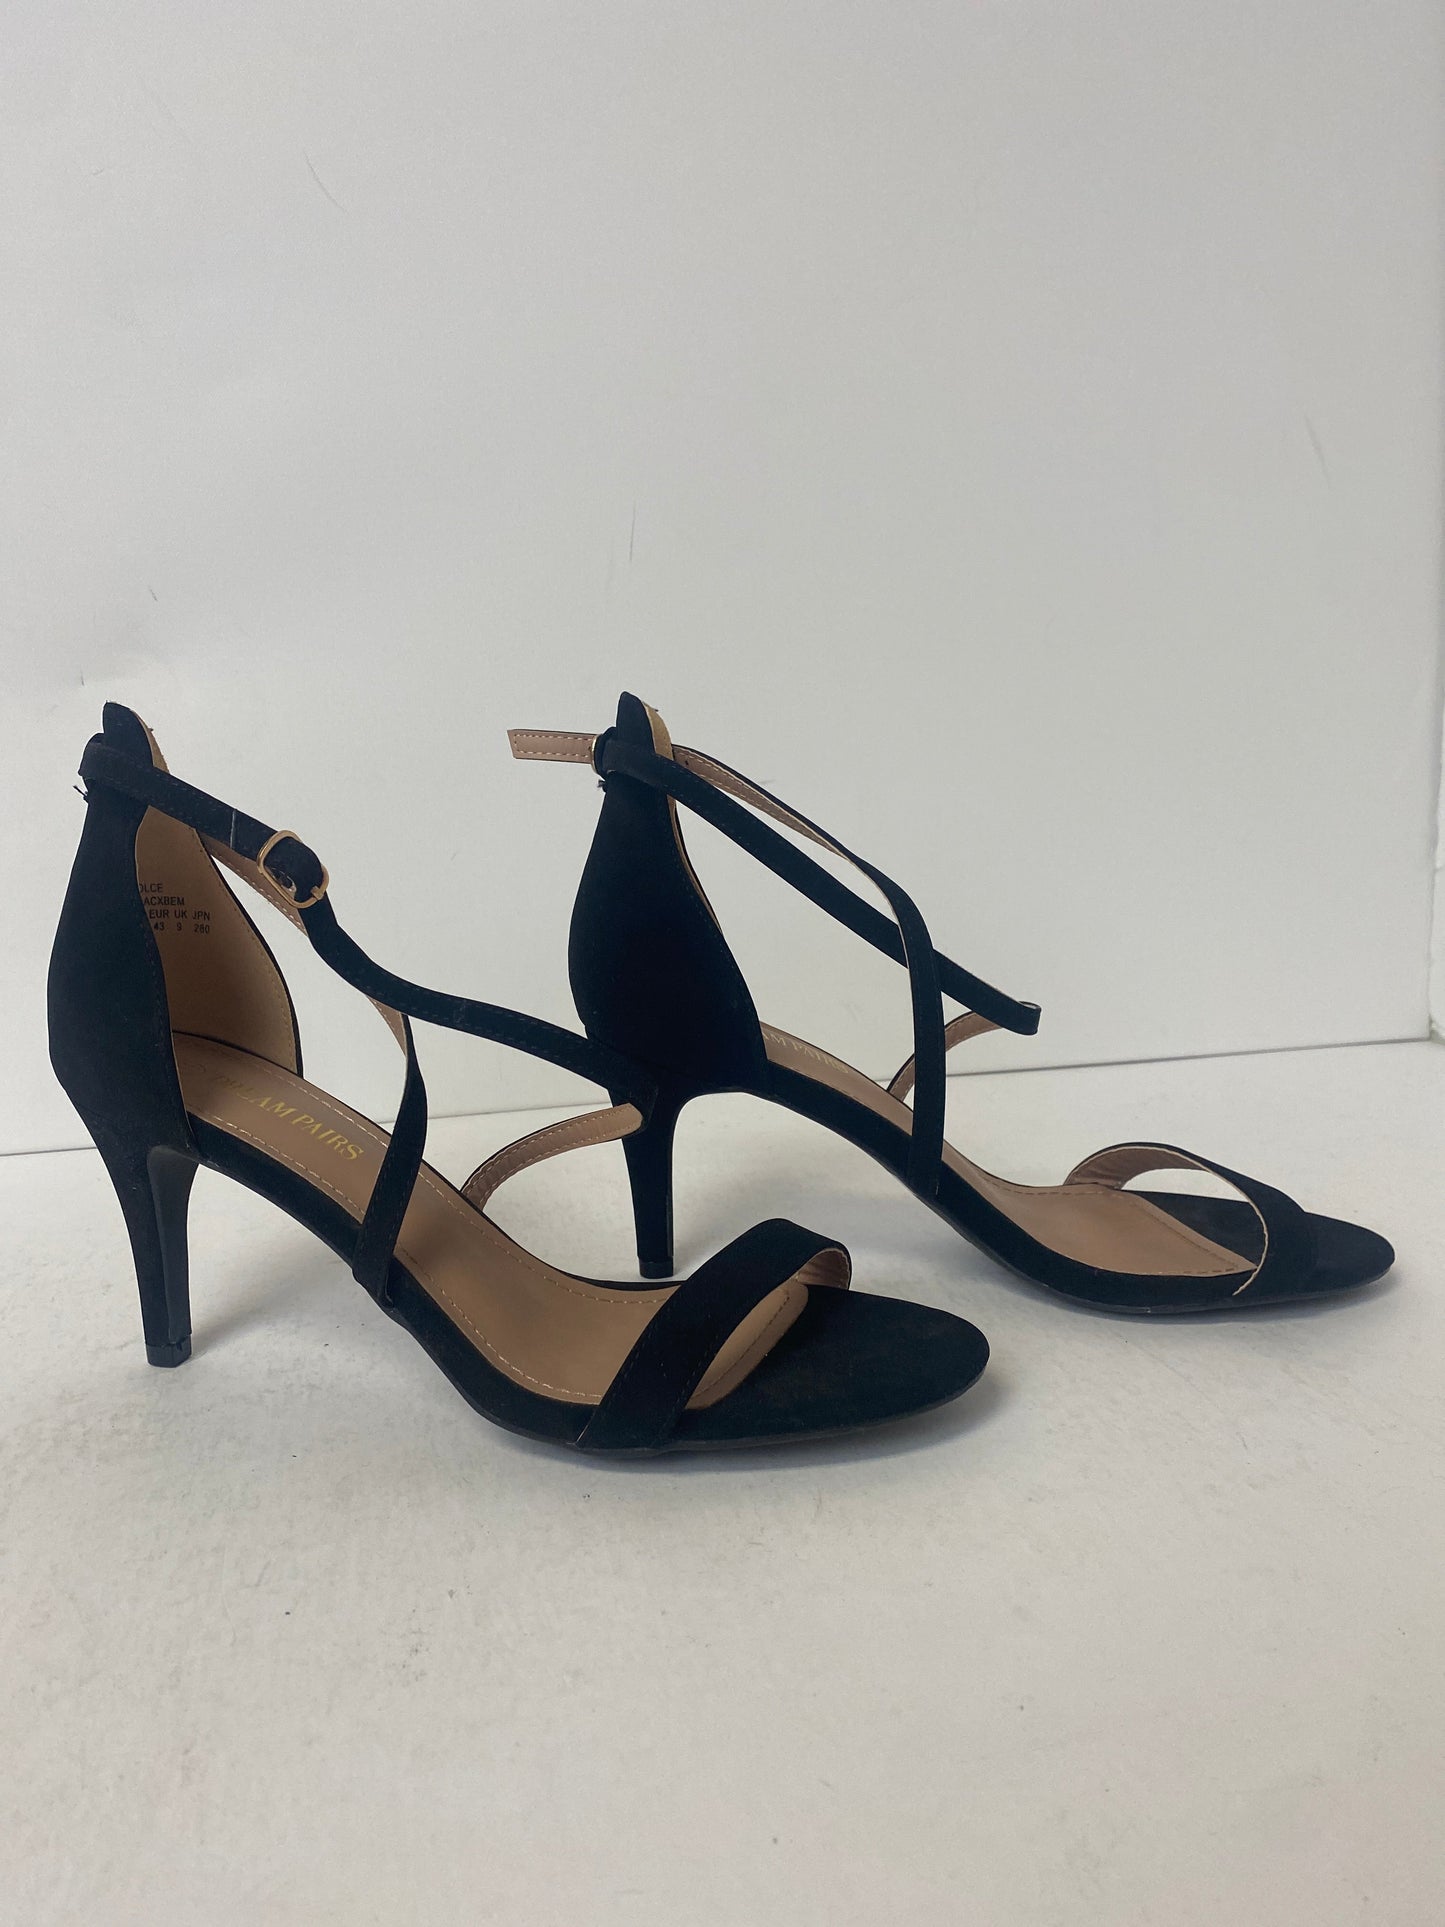 Shoes Heels Stiletto By Clothes Mentor  Size: 11